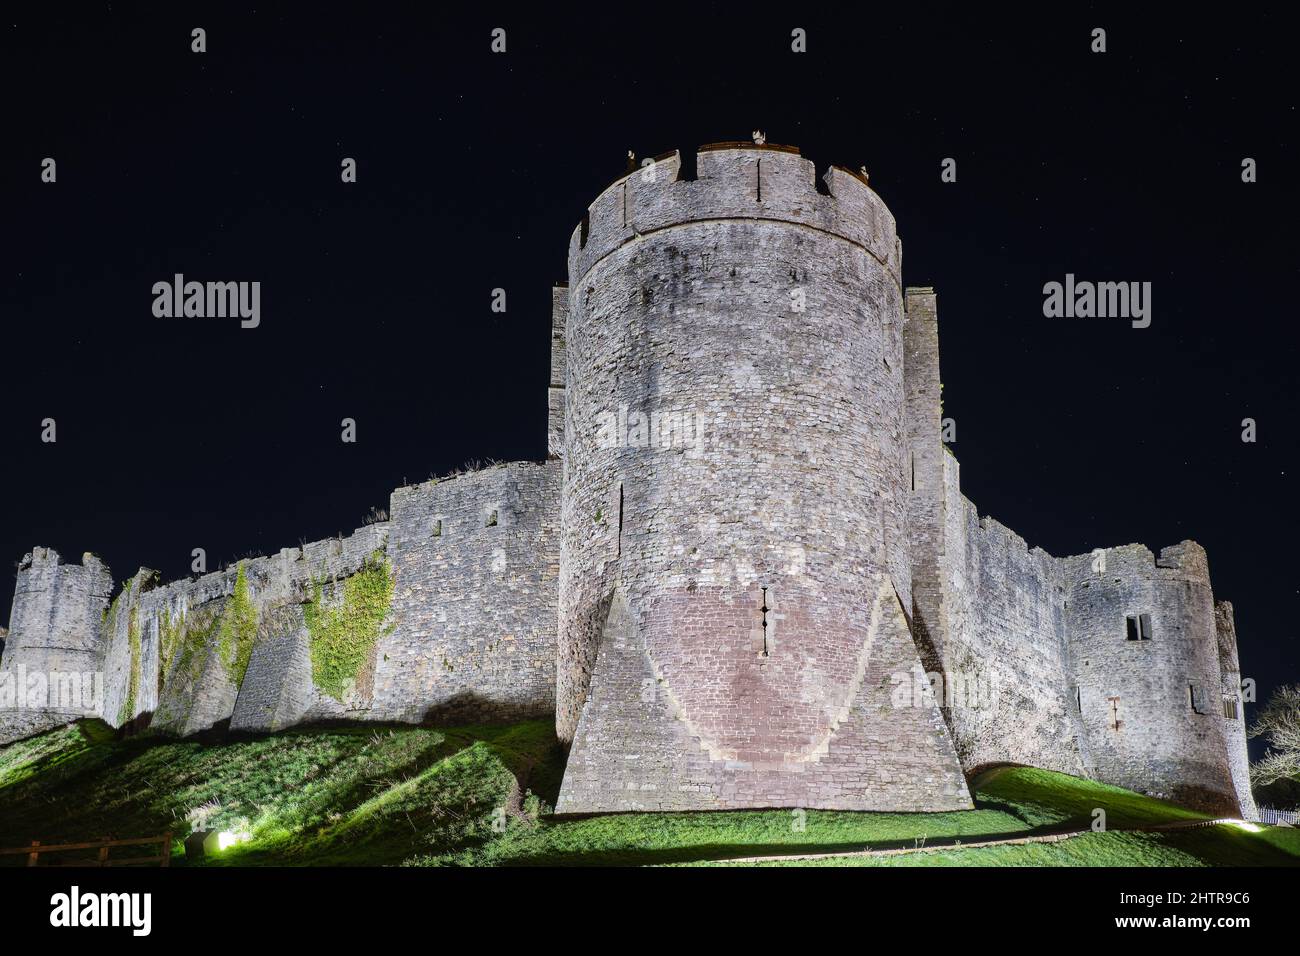 Chepstow Castle in Wales, at night Stock Photo